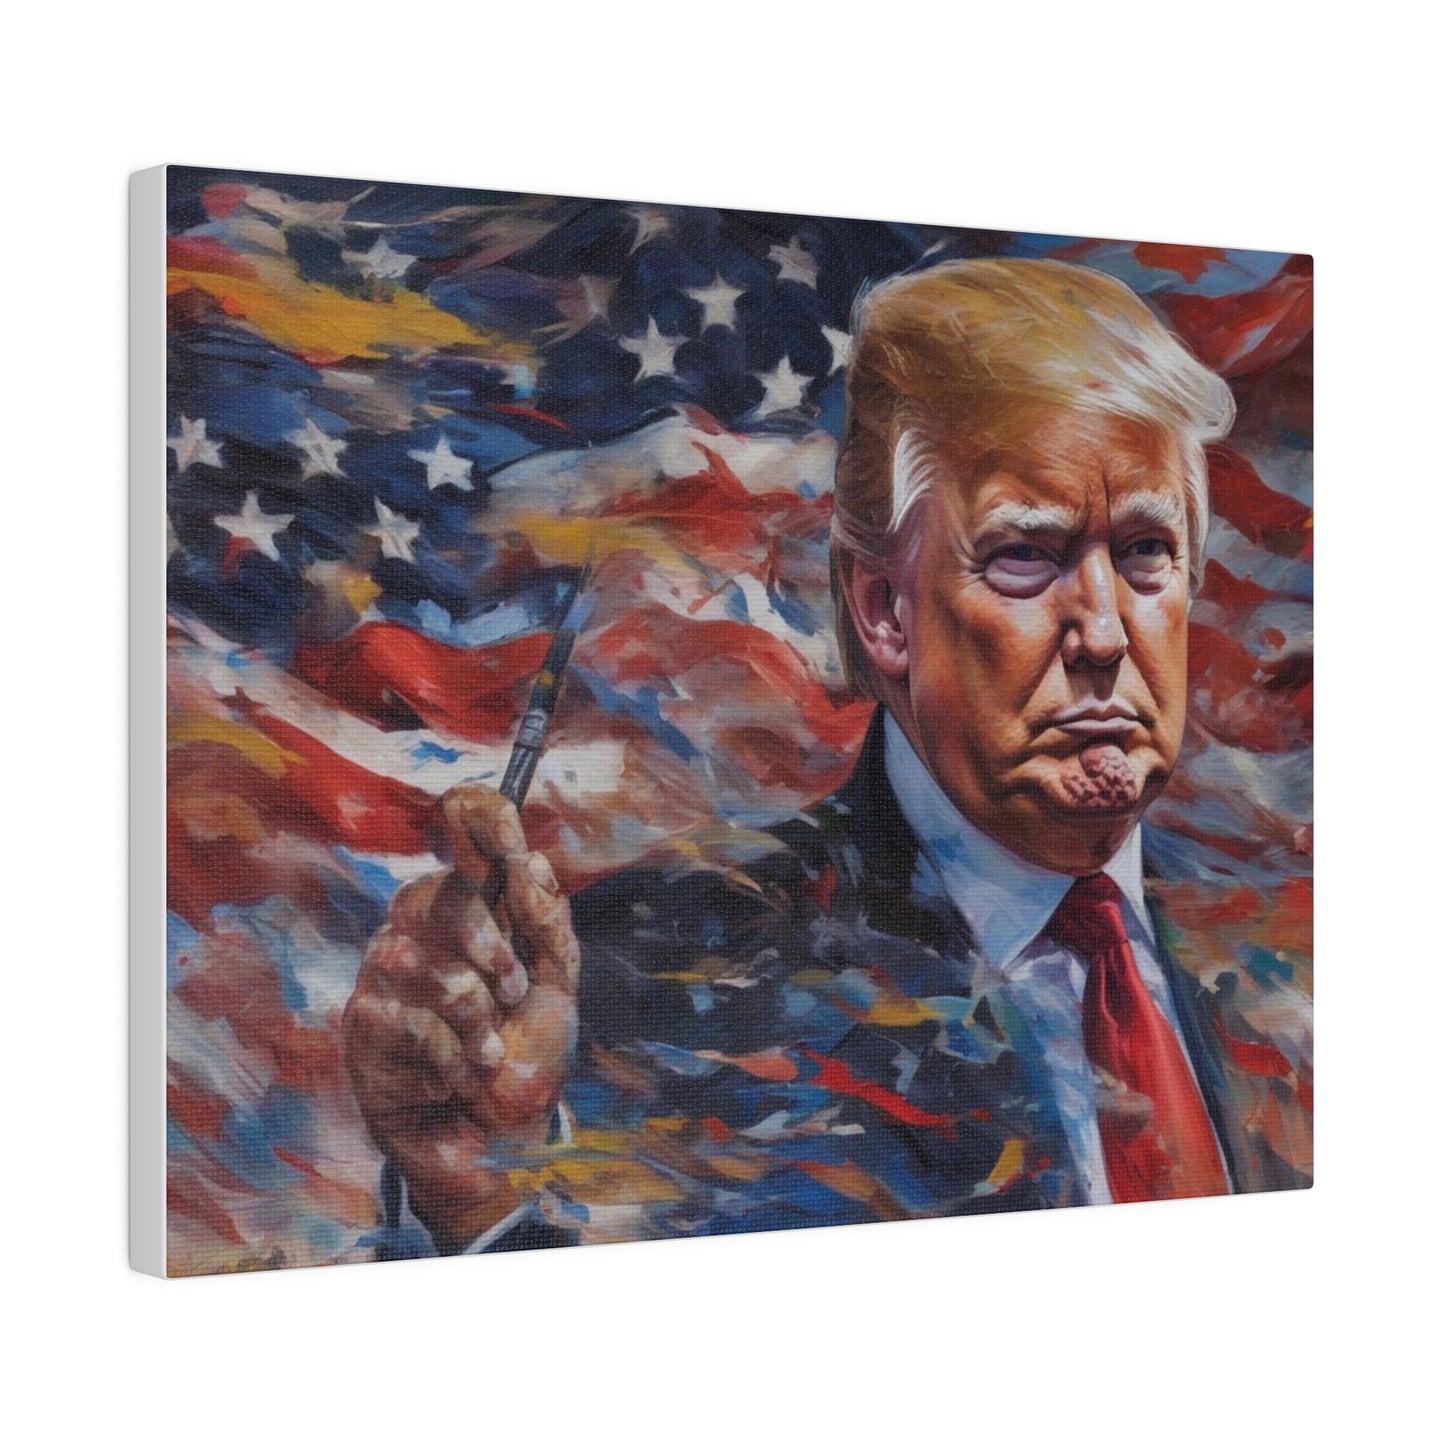 Trump in American Flag, Reprint painting by Bella K. Matte Canvas, Stretched, 0.75"